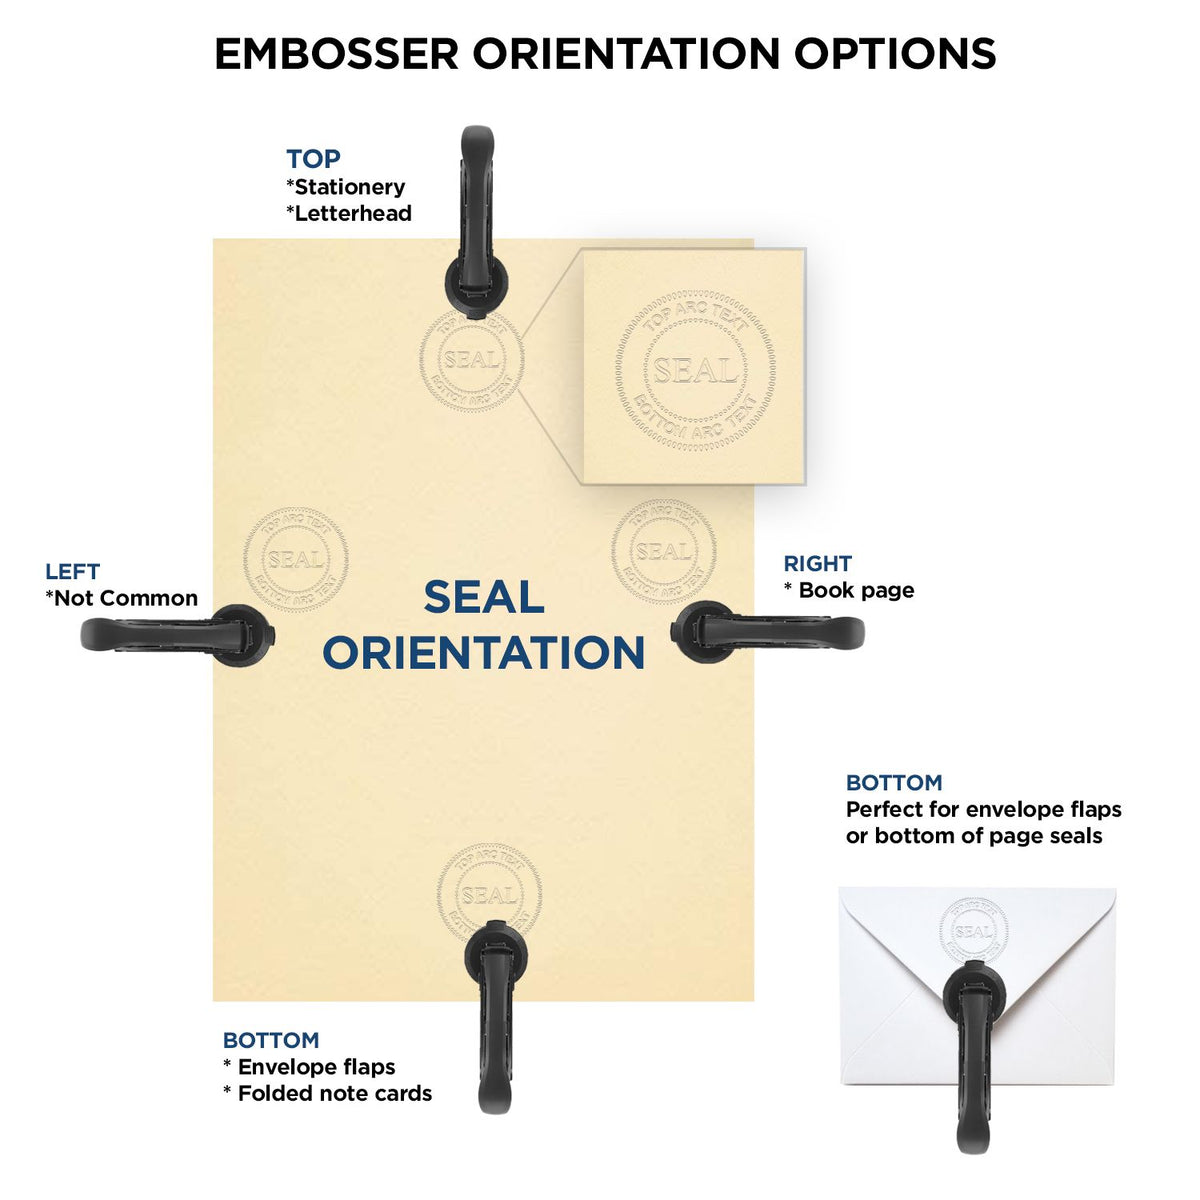 An infographic for the Hybrid Utah Land Surveyor Seal showing embosser orientation, this is showing examples of a top, bottom, right and left insert.